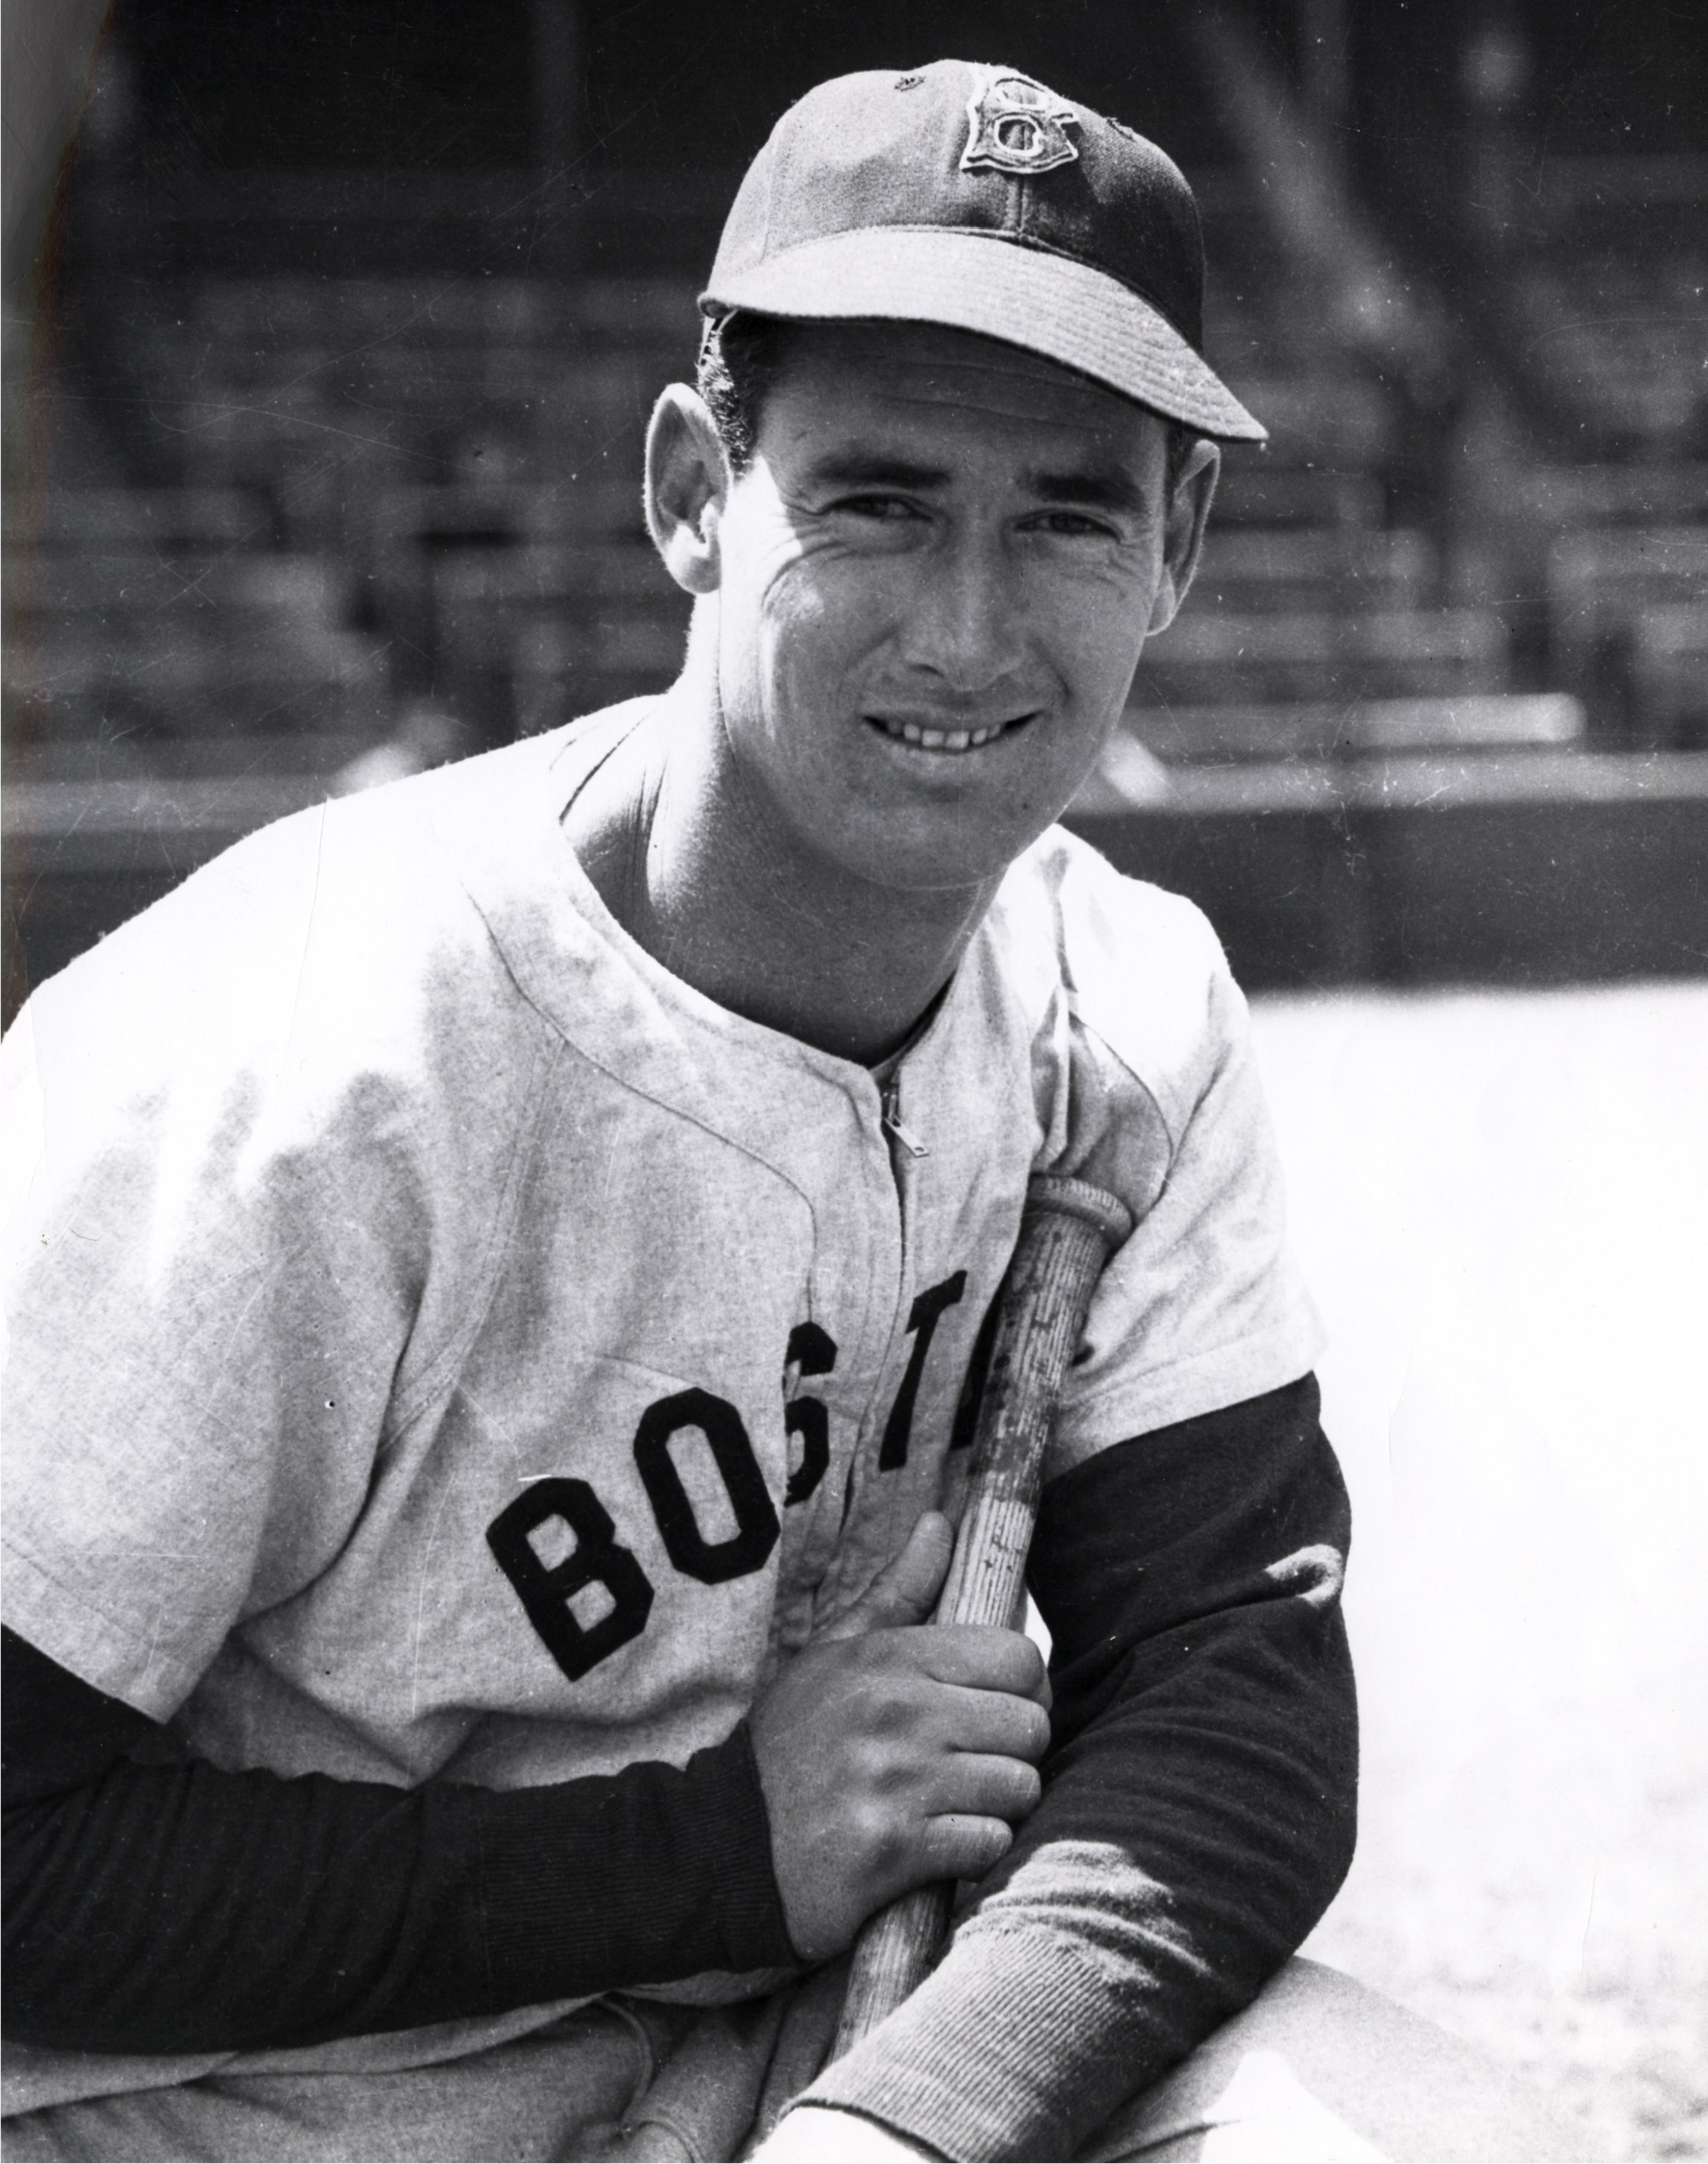 Ted Williams goes 6-for-8 in doubleheader to finish season at .406